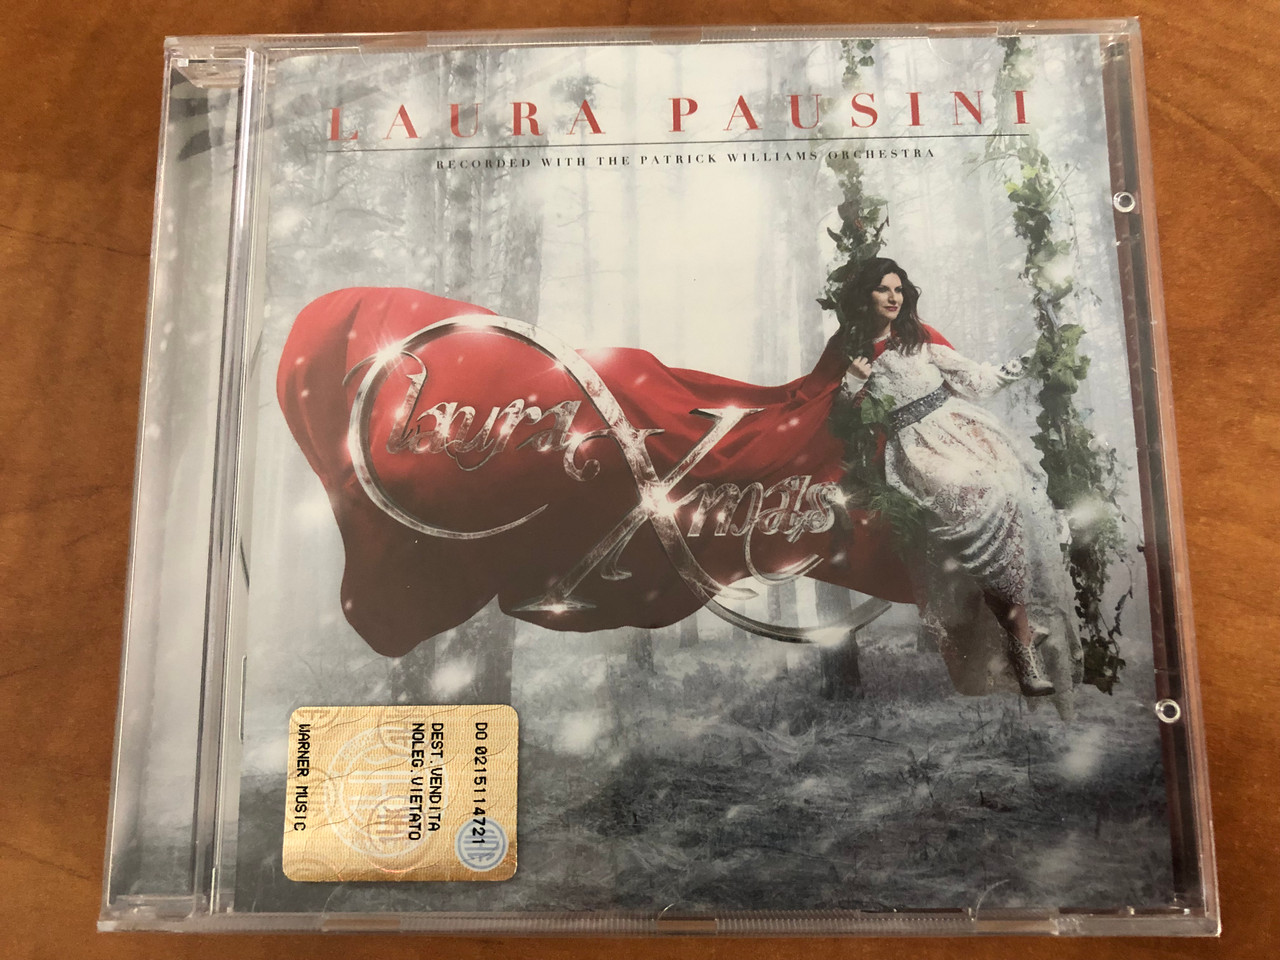 Laura Pausini Recorded With The Patrick Williams Orchestra – Laura XMas /  Atlantic Audio CD 2016 / 5054197327223 - Bible in My Language